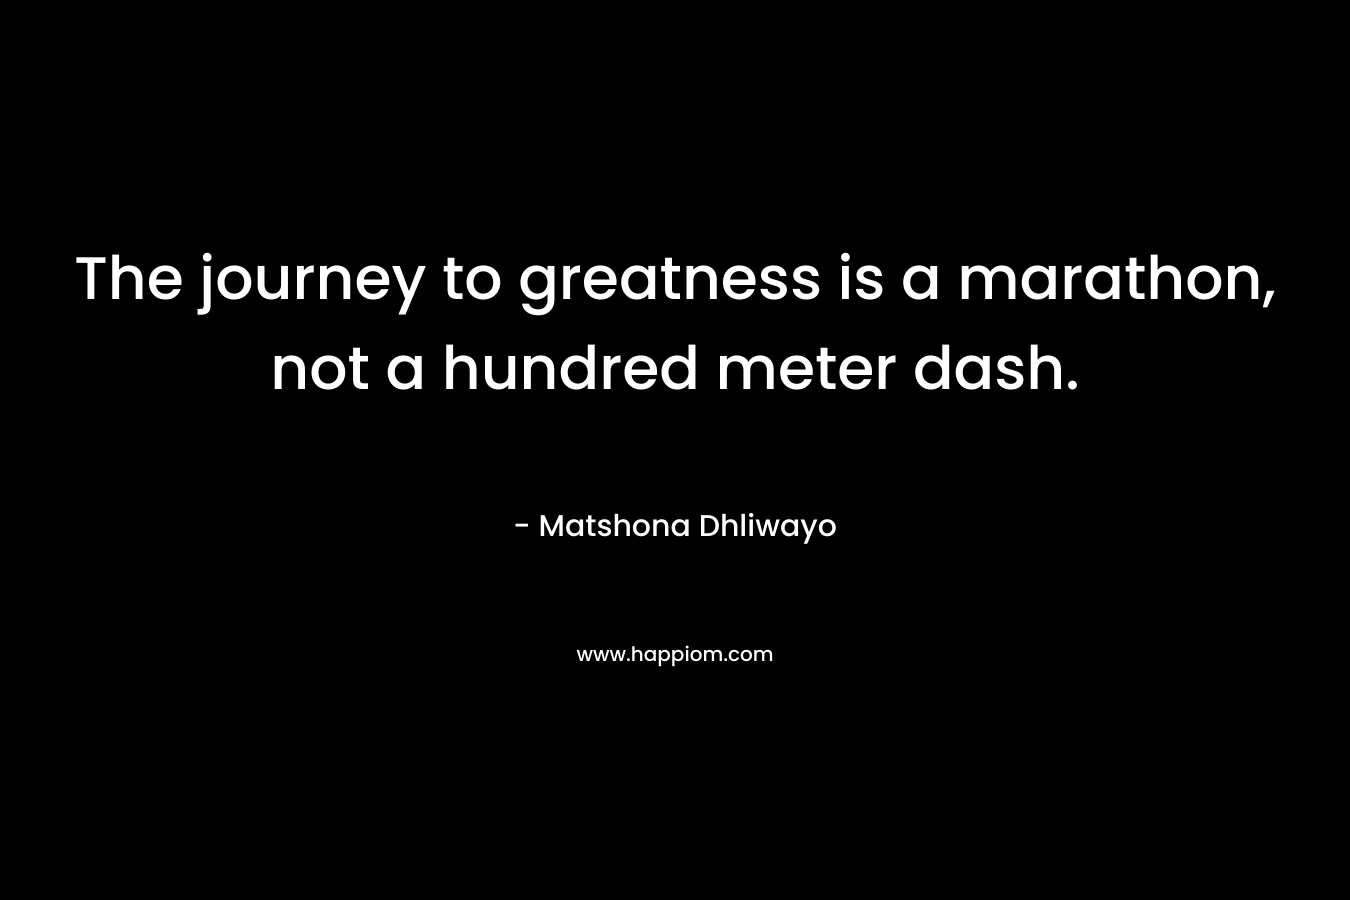 The journey to greatness is a marathon, not a hundred meter dash. – Matshona Dhliwayo